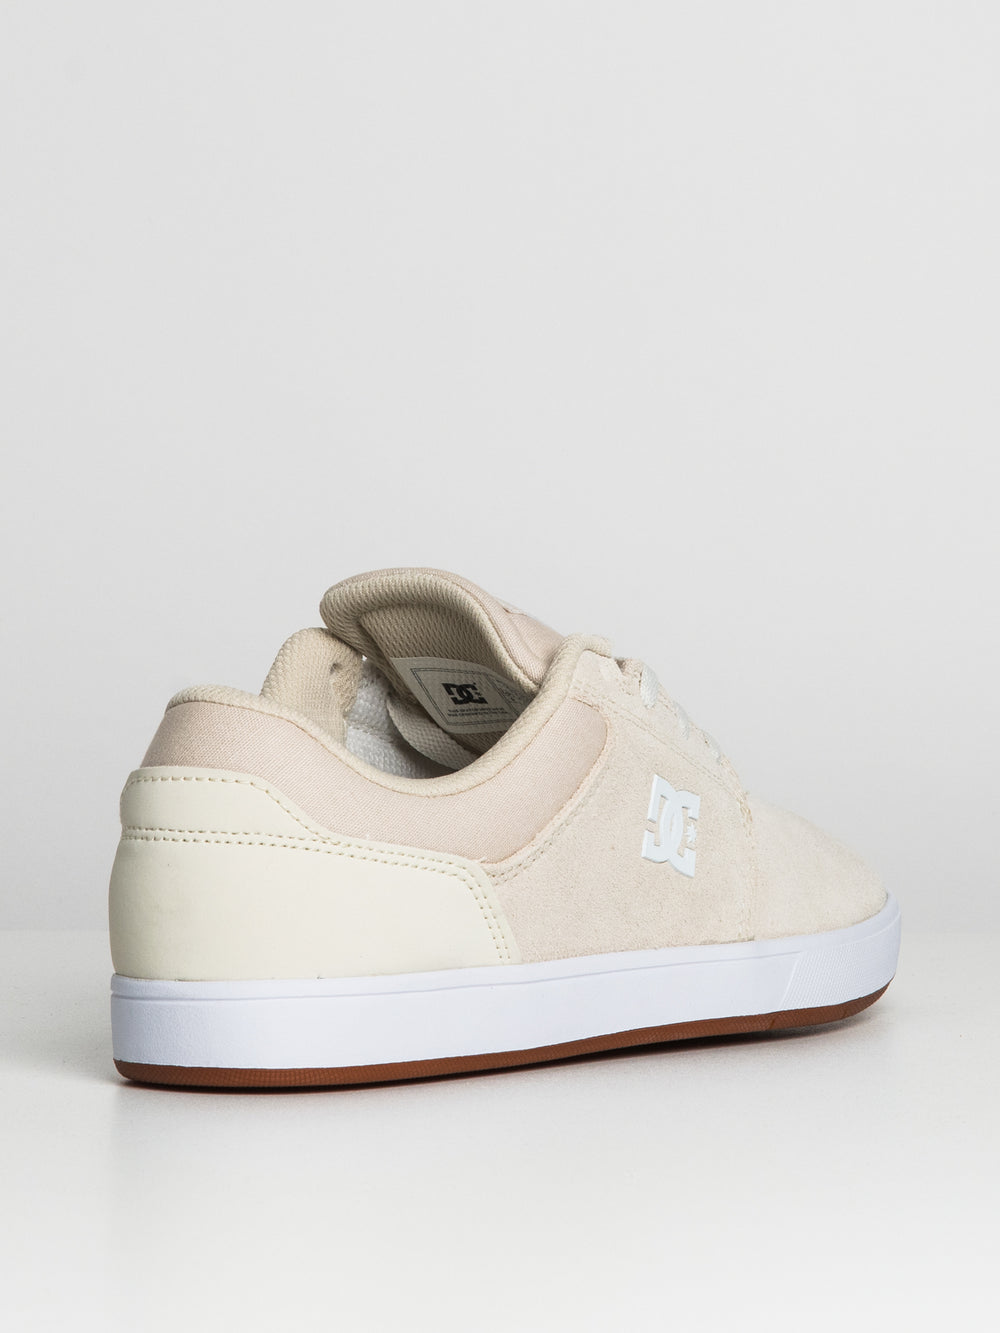 MENS DC SHOES CRISIS 2 | Boathouse Footwear Collective